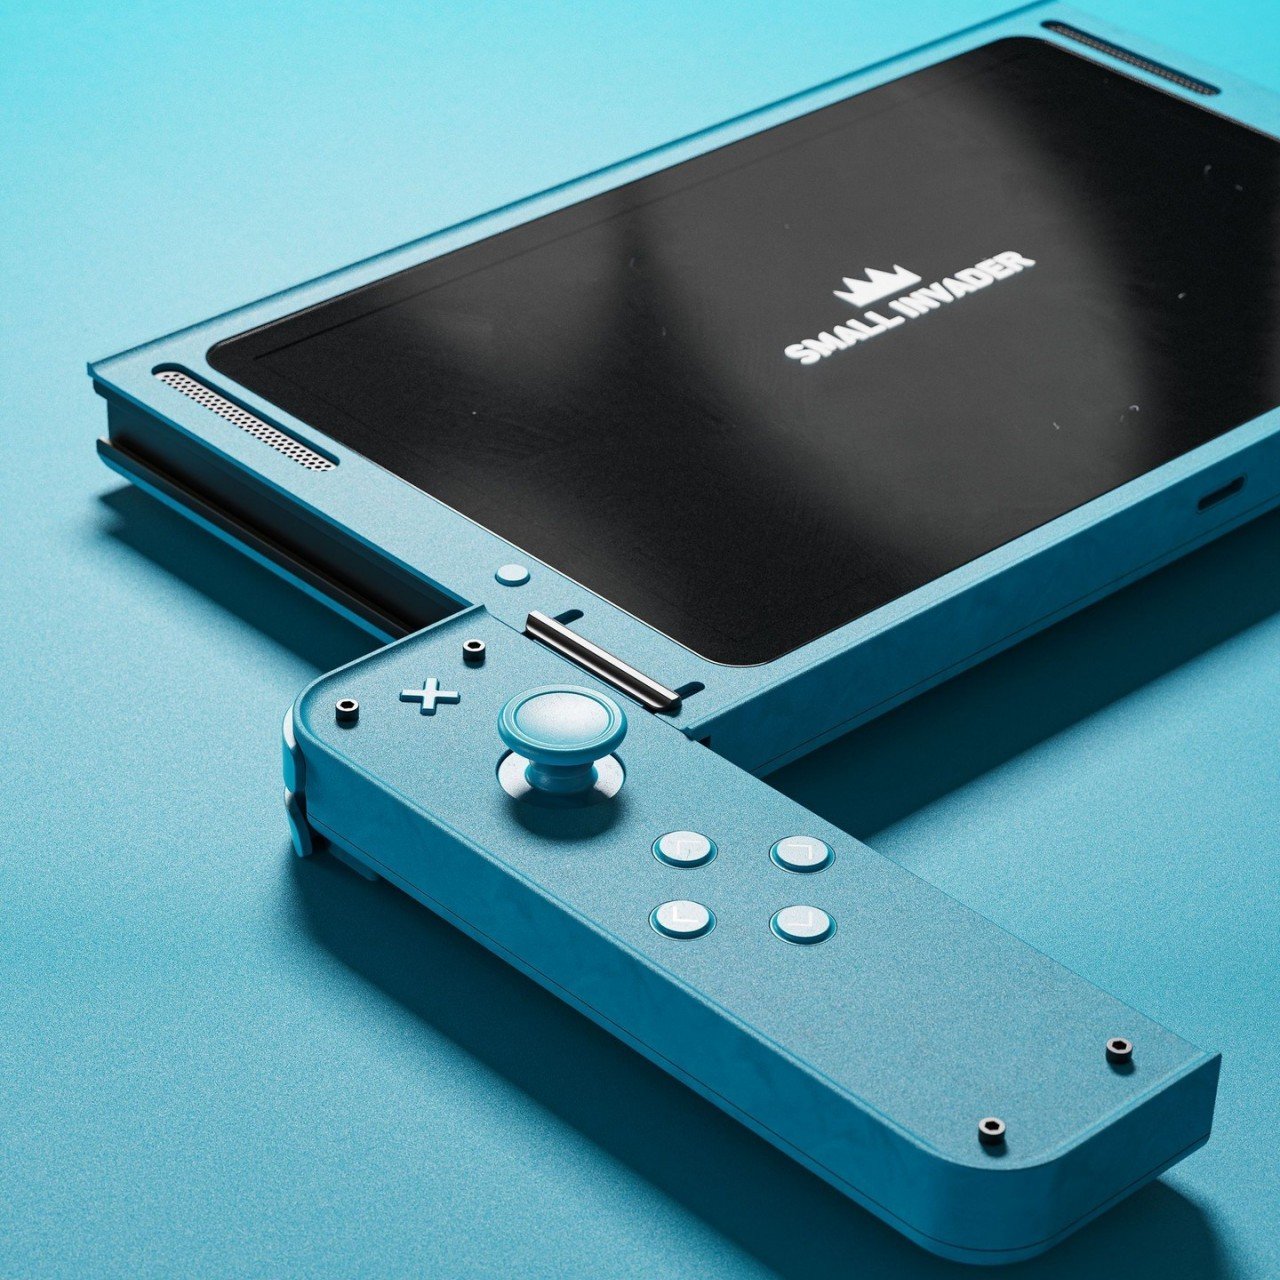 Slick Nintendo Switch 2 UI stars in new unofficial fan-made concept clip -   News